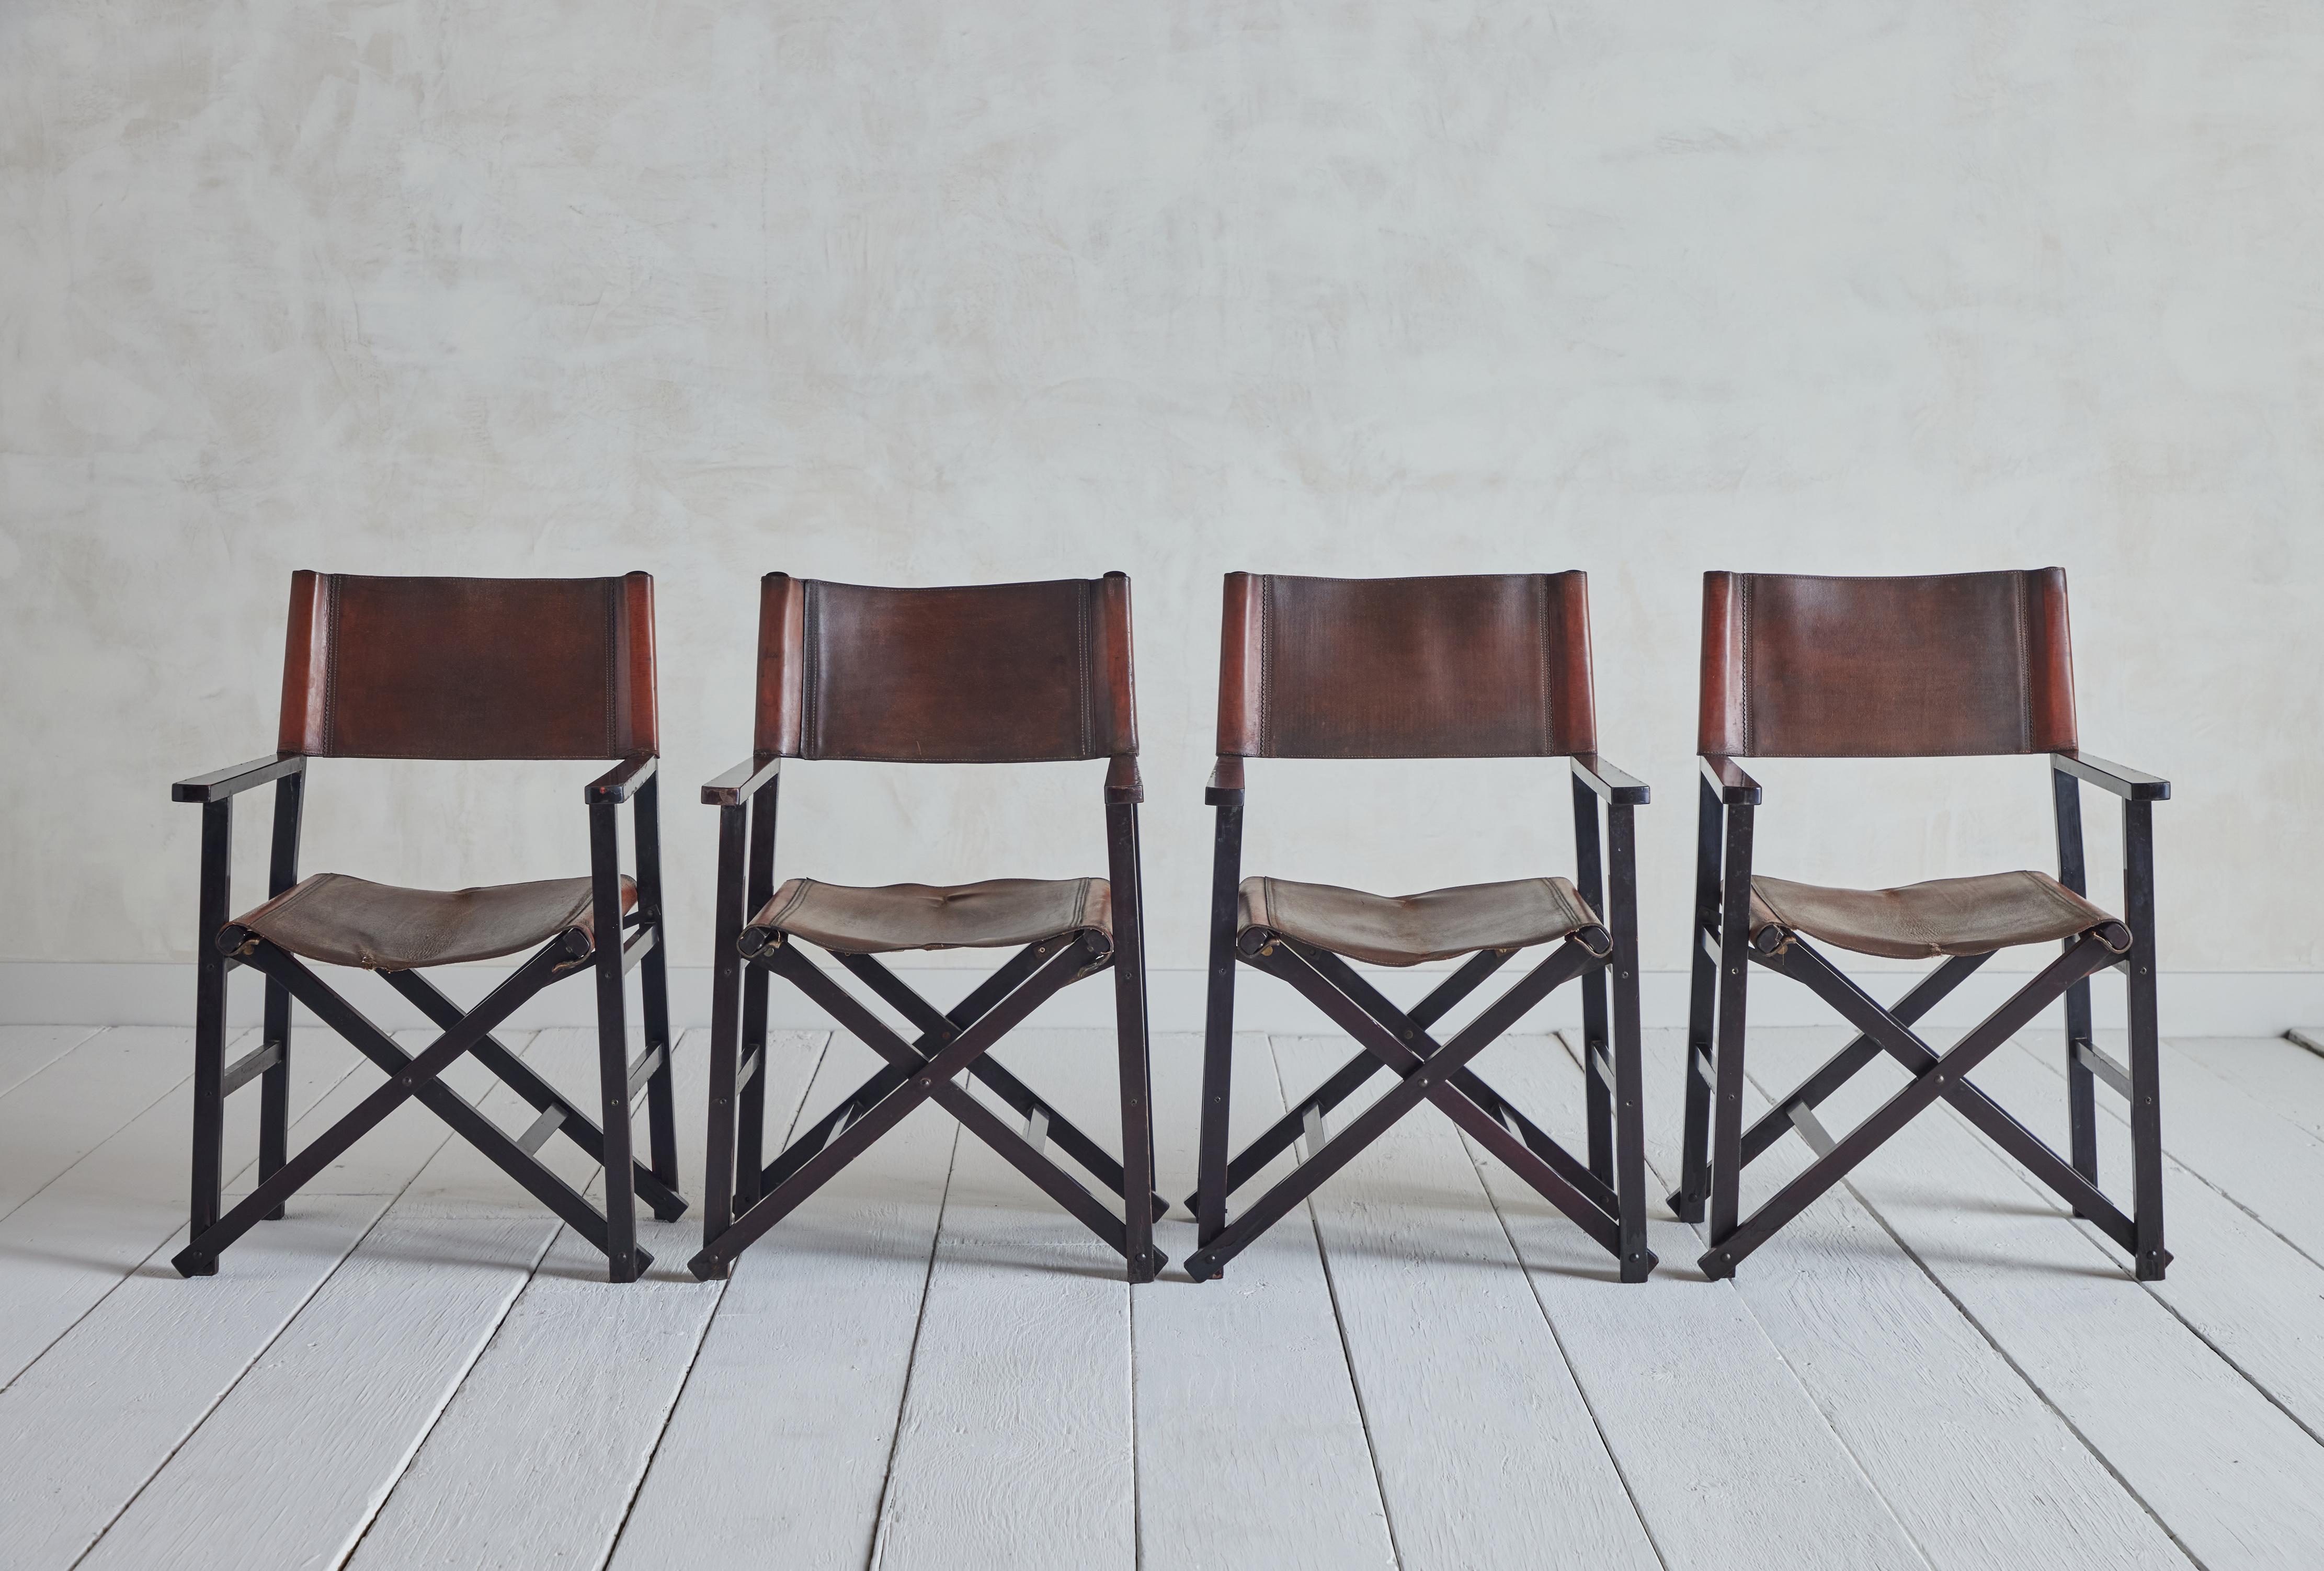 Pair of leather and wood directors chairs from Denmark, 1960s. TWO SETS AVAILABLE. 